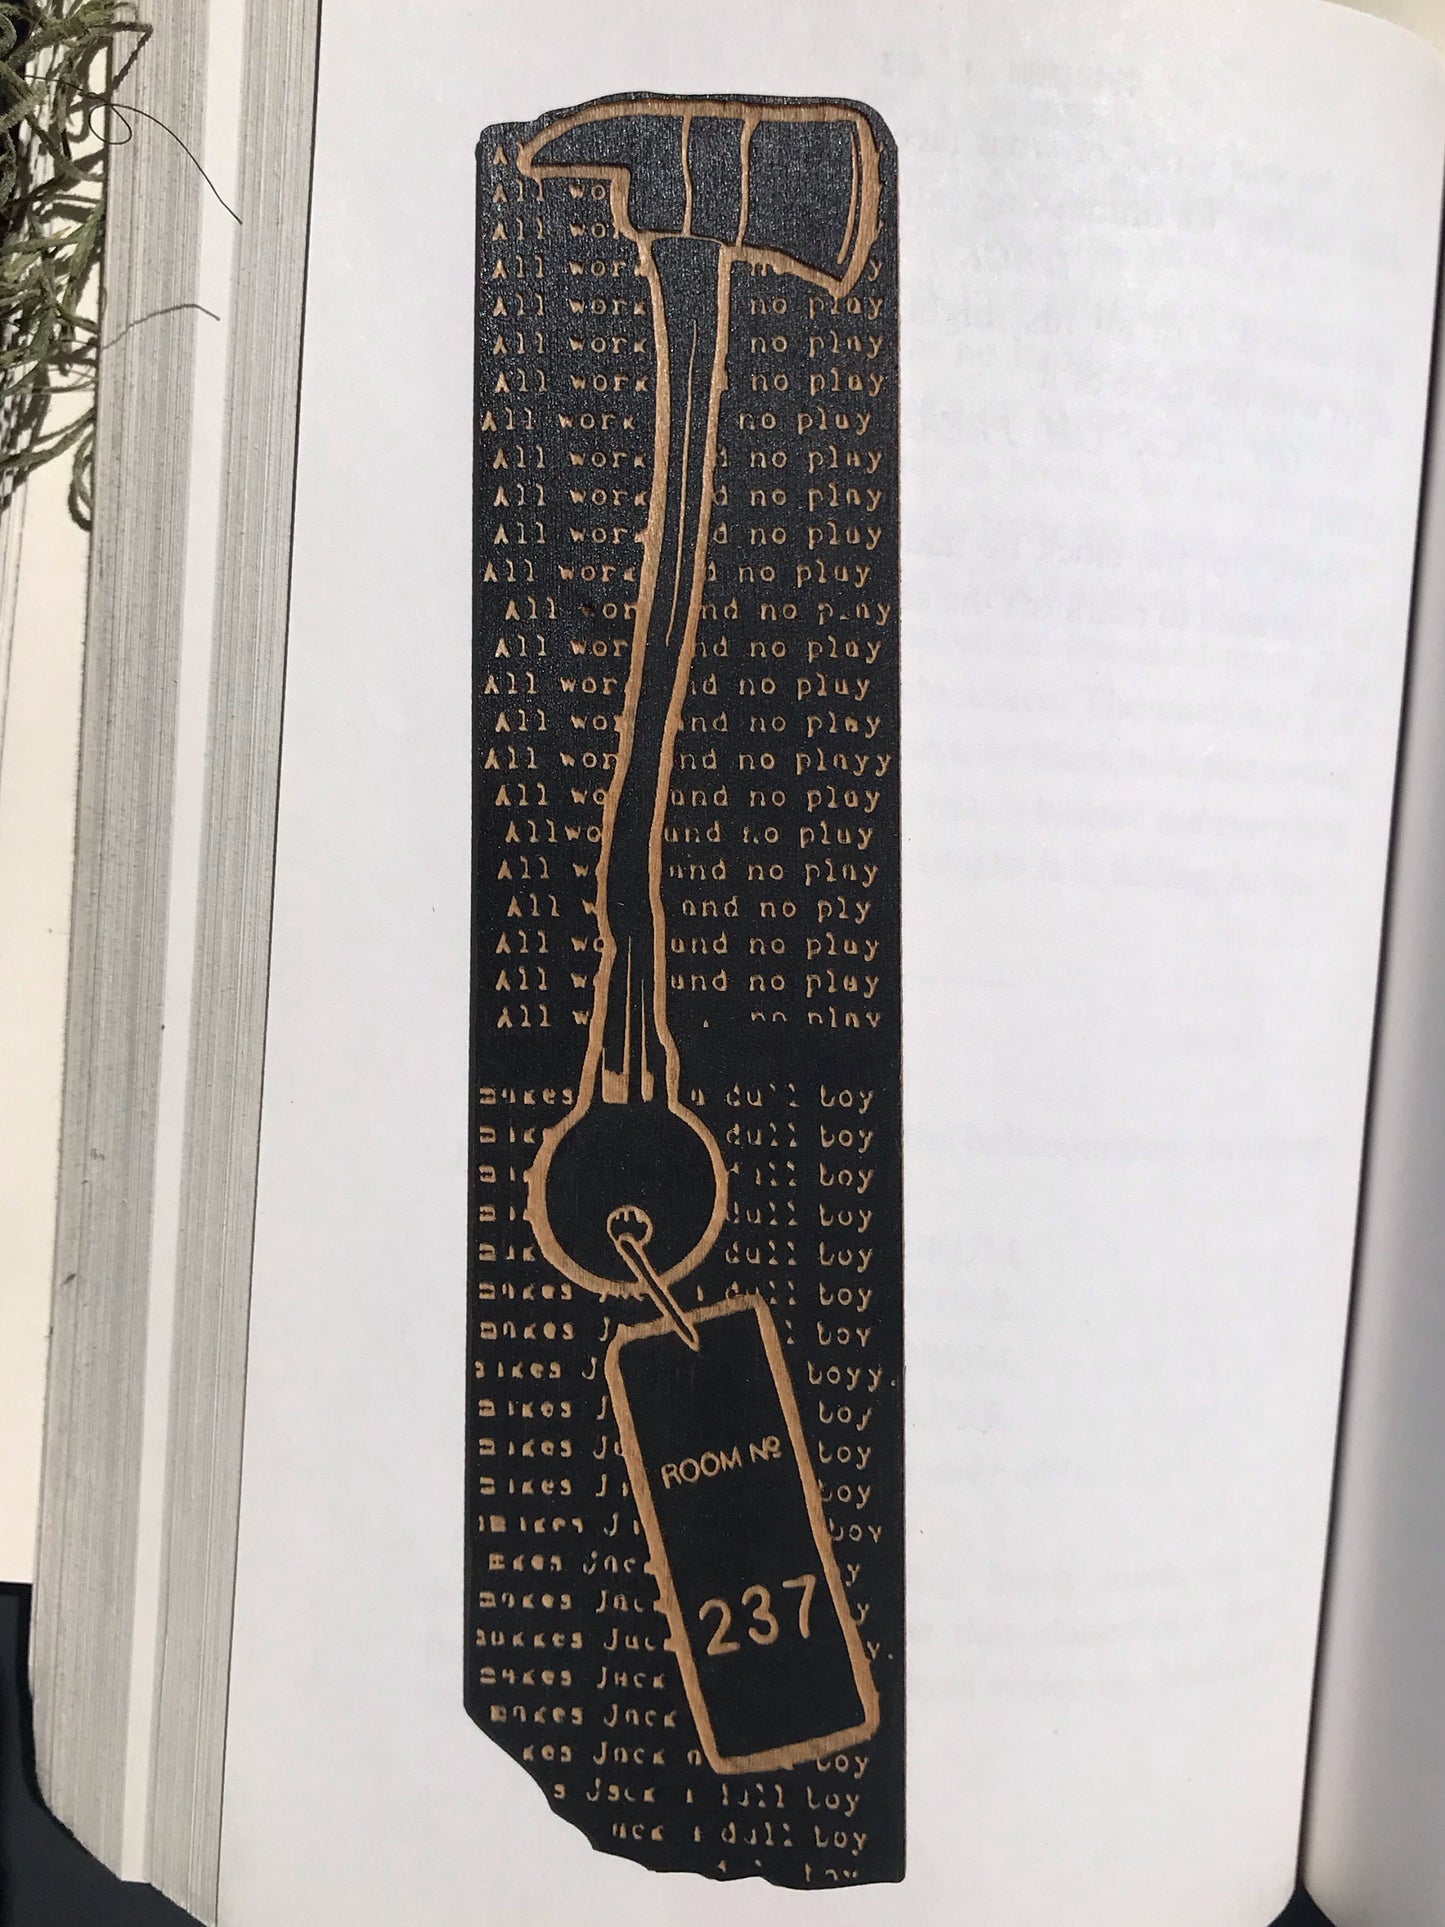 The Shining Stephen King Wooden Bookmark